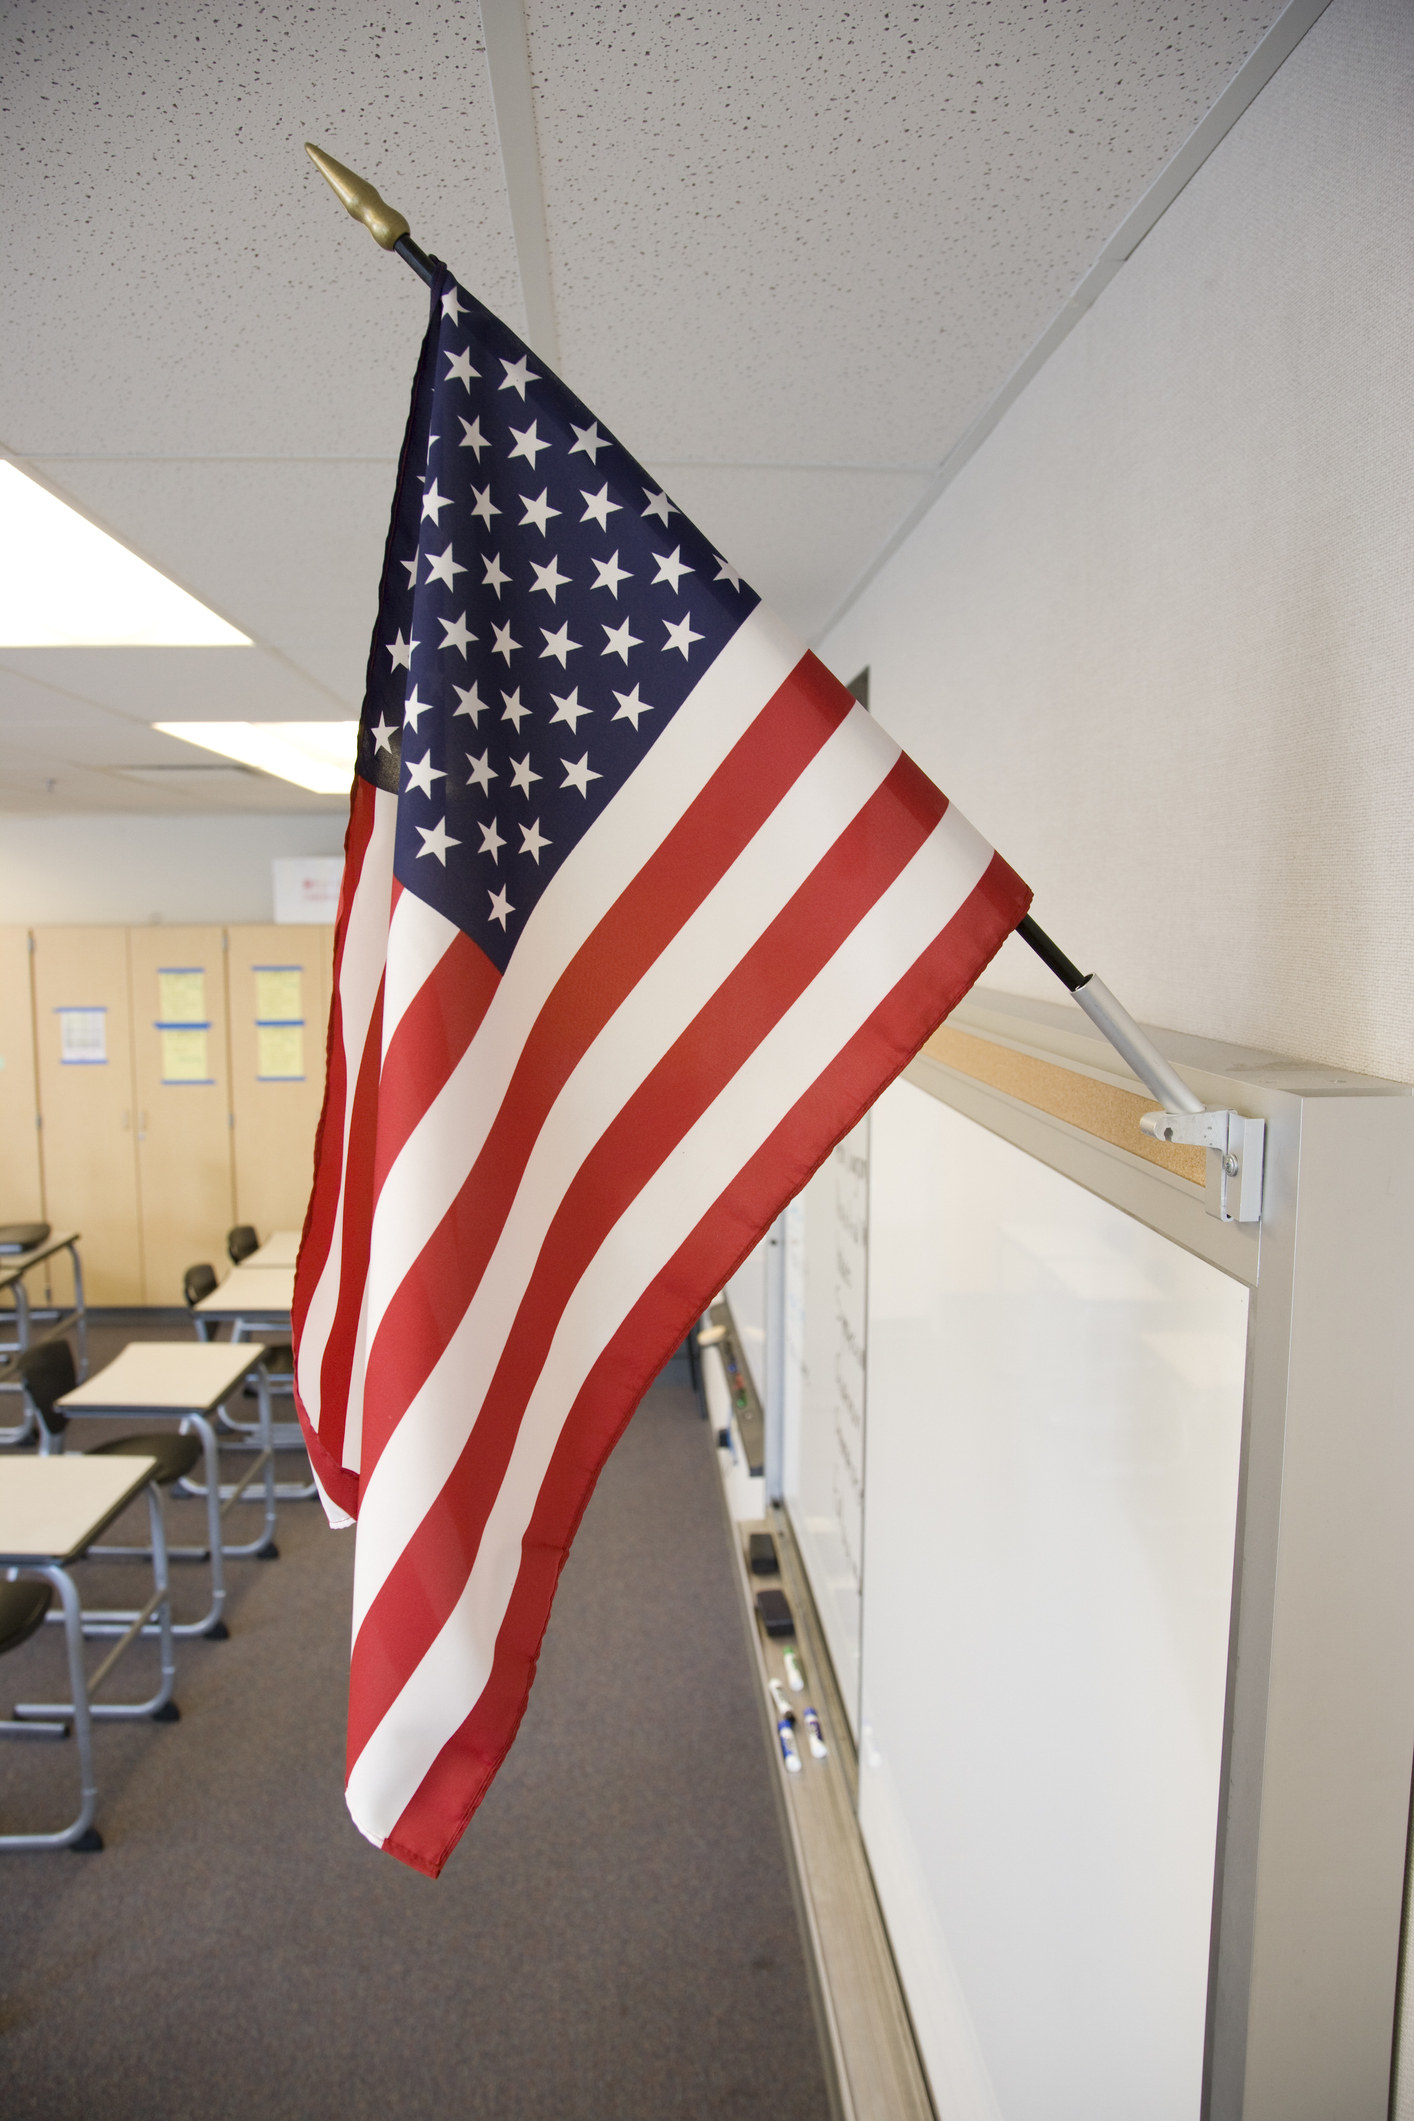 The American flag in a classroom